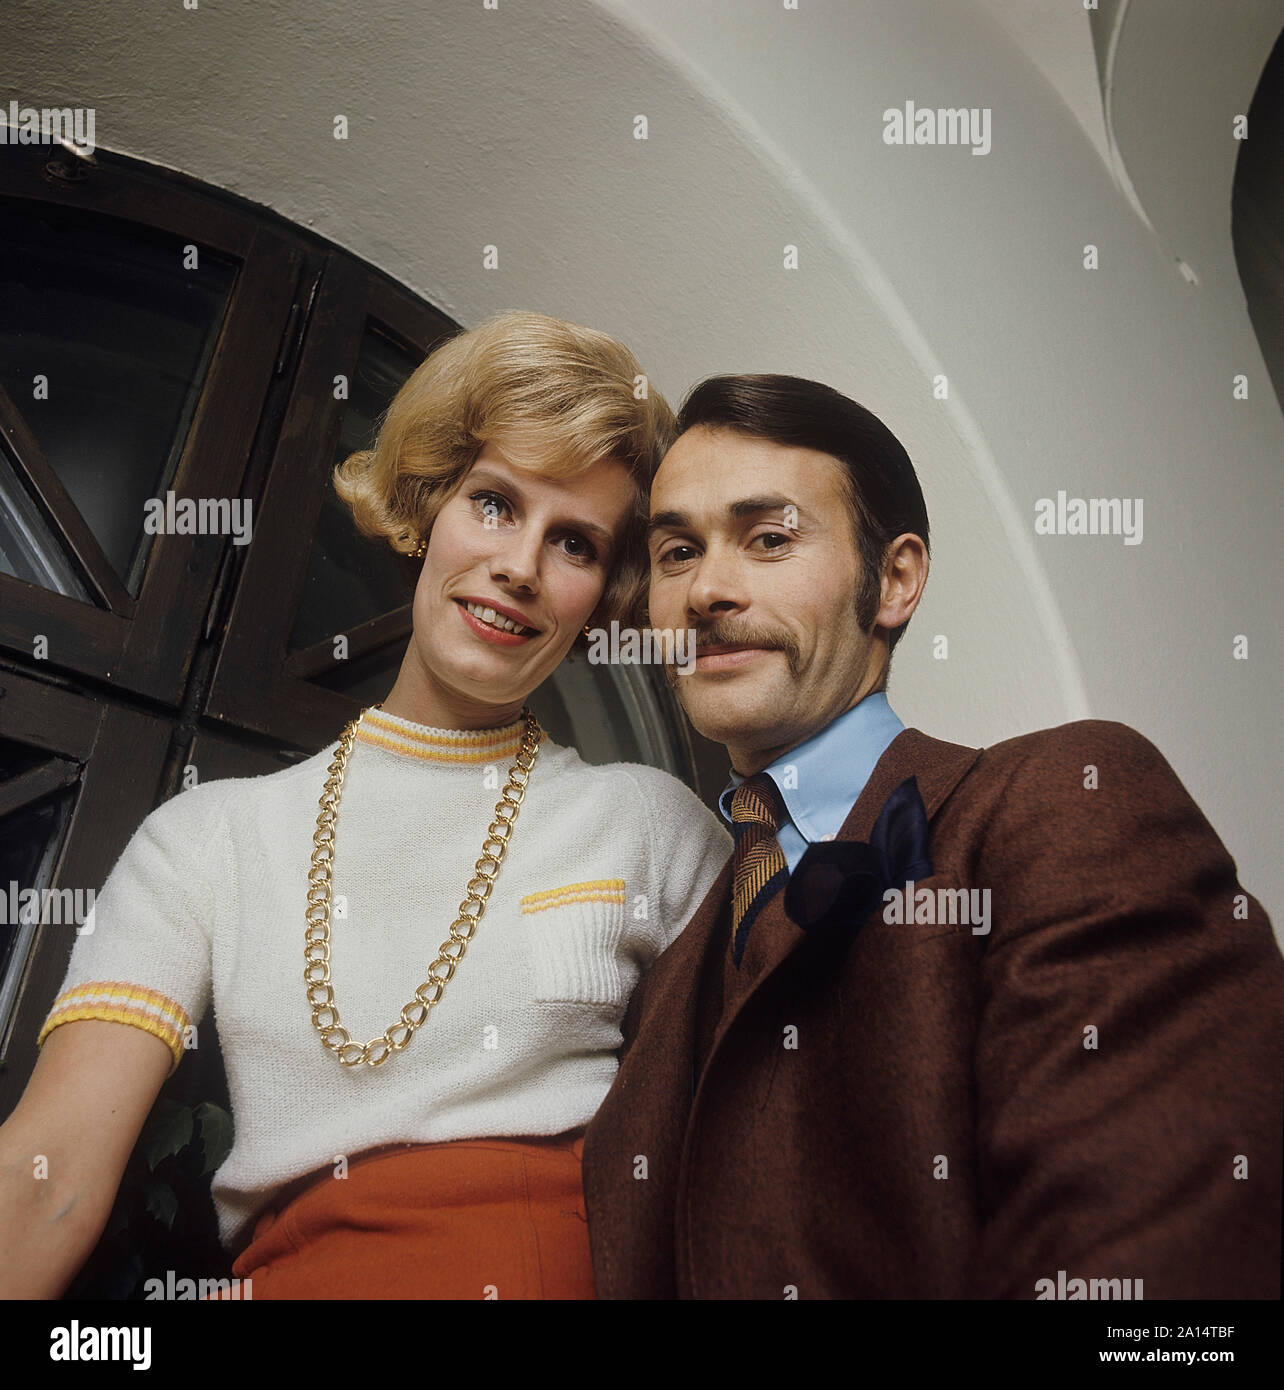 1960s parents. A couple is standing together. Sweden november 13 1969. ref CV34-3 Stock Photo